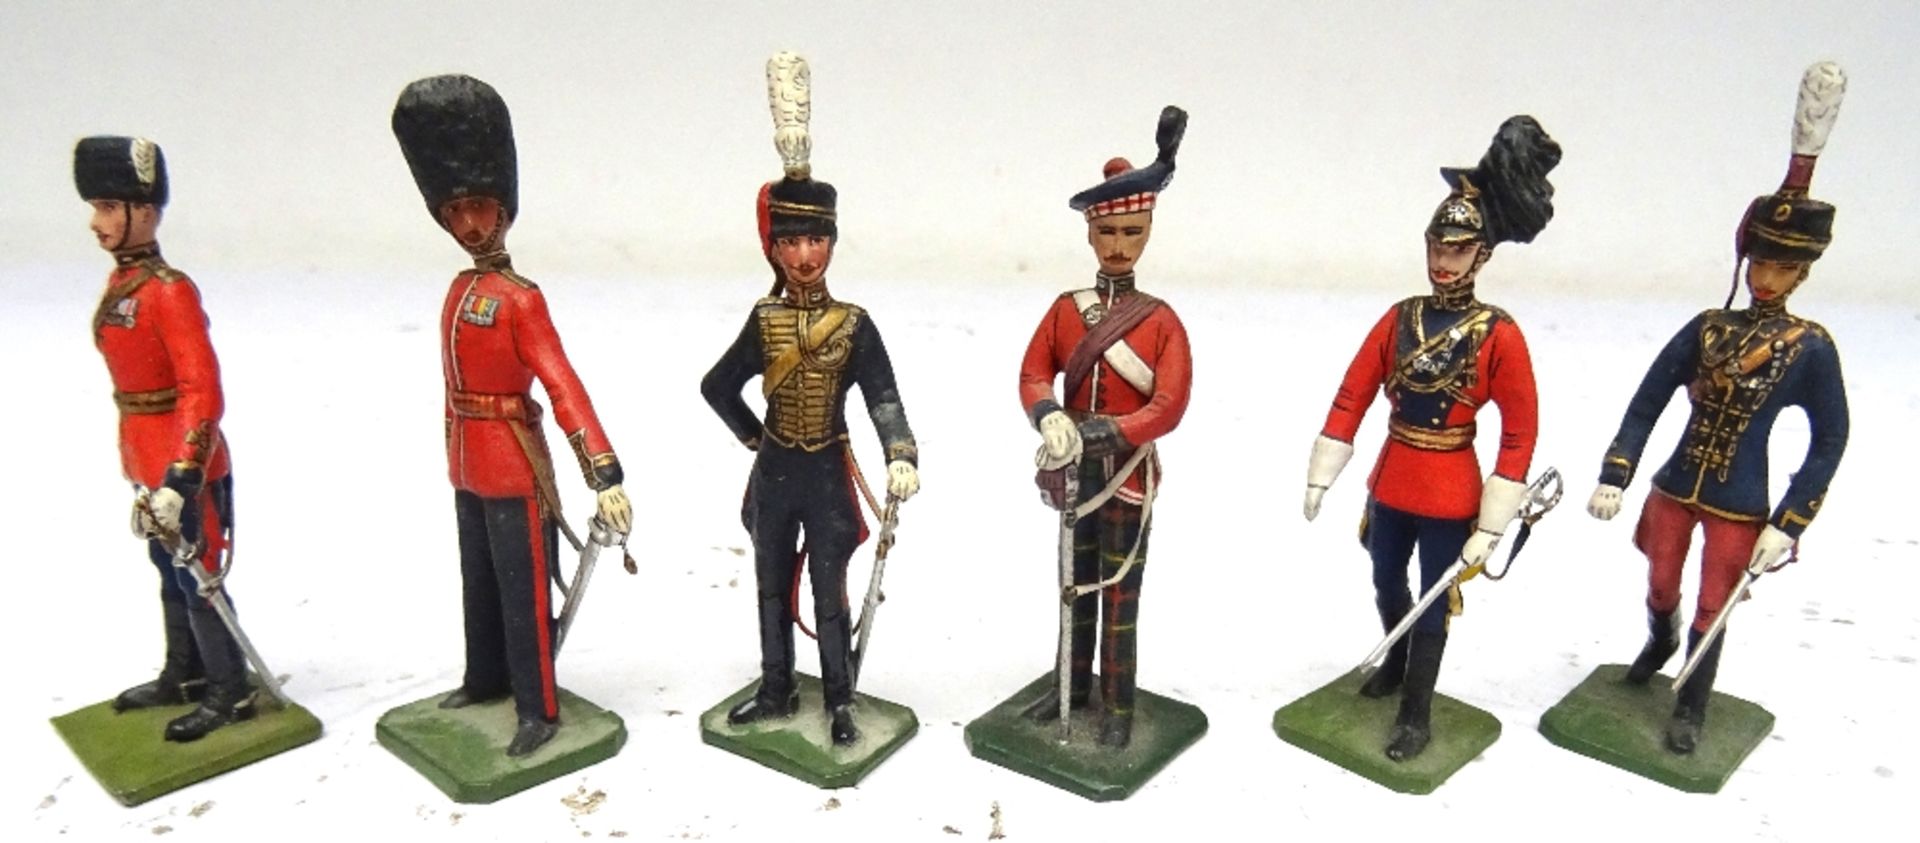 Greenwood and Ball Full Dress Officers of the British Army - Image 6 of 7